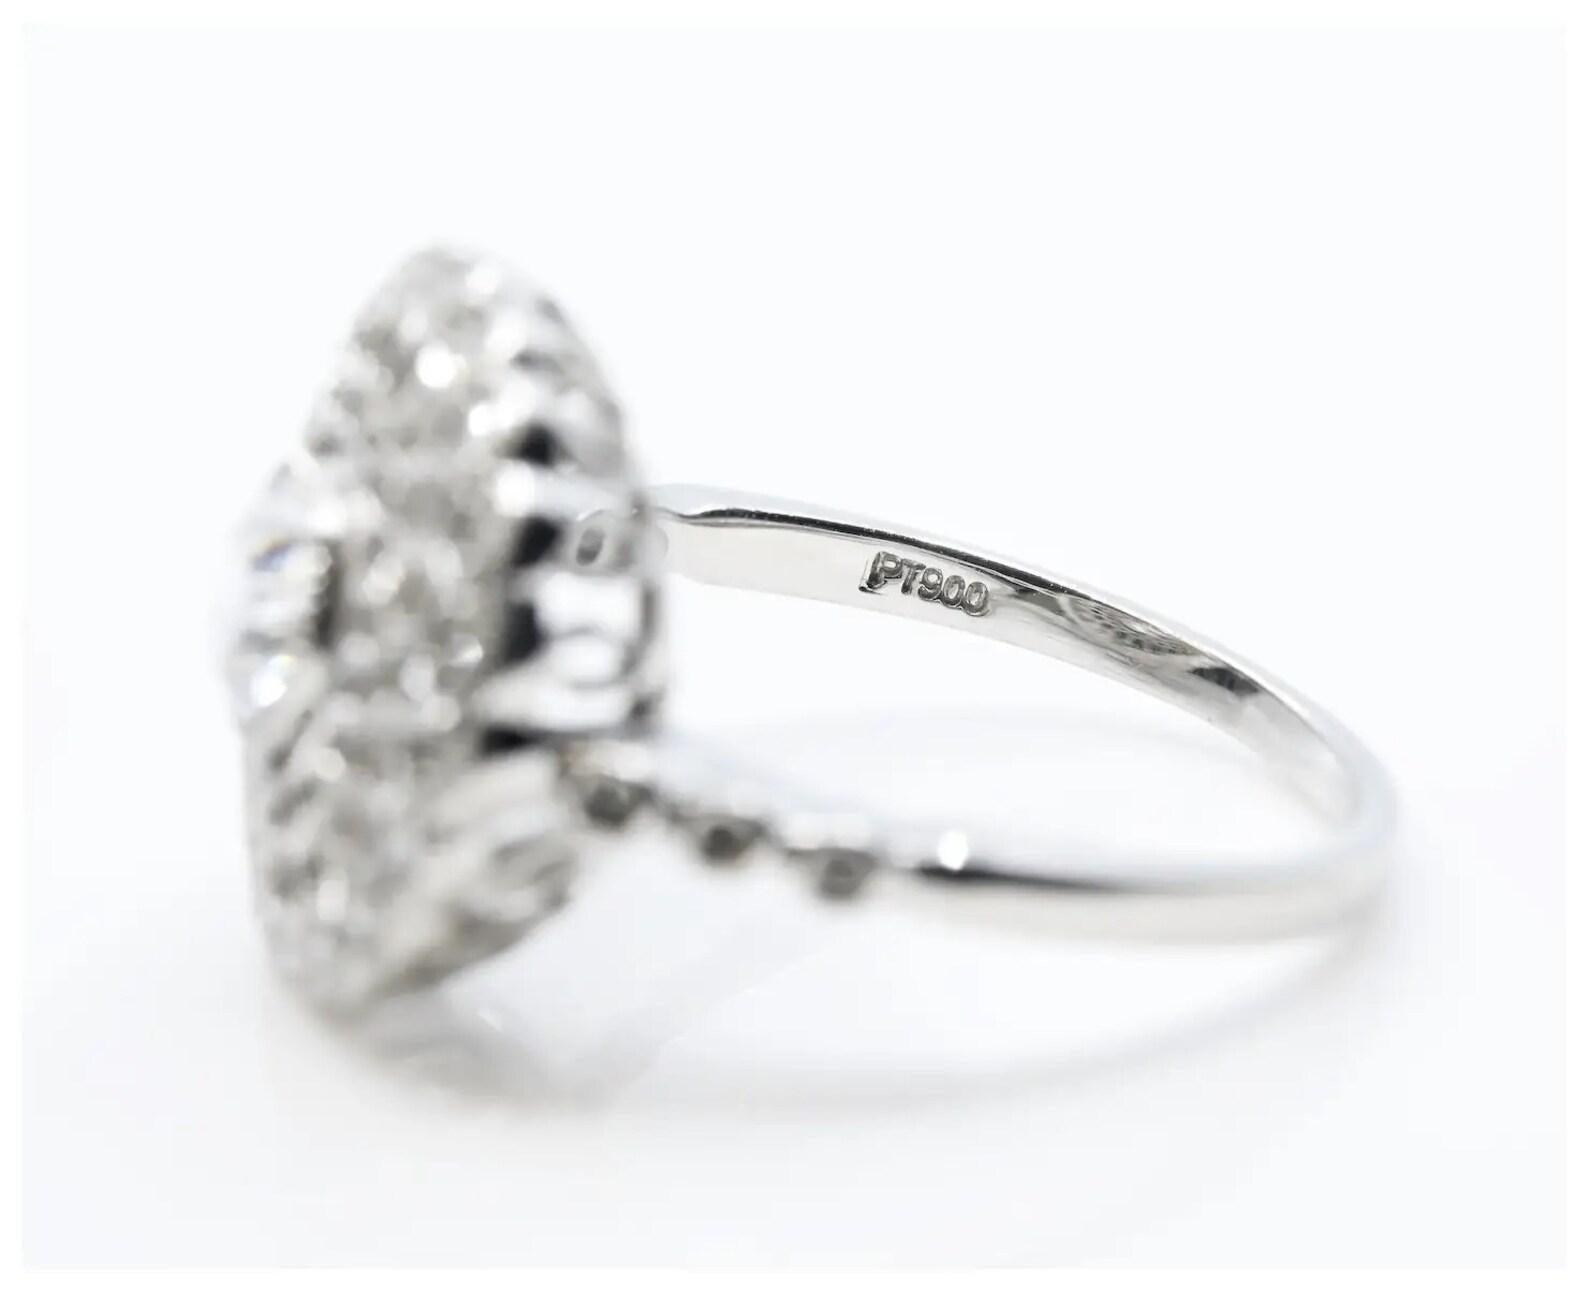 Enchanting Art Deco Diamond Filigree Engagement Ring in Platinum In Excellent Condition For Sale In Boston, MA